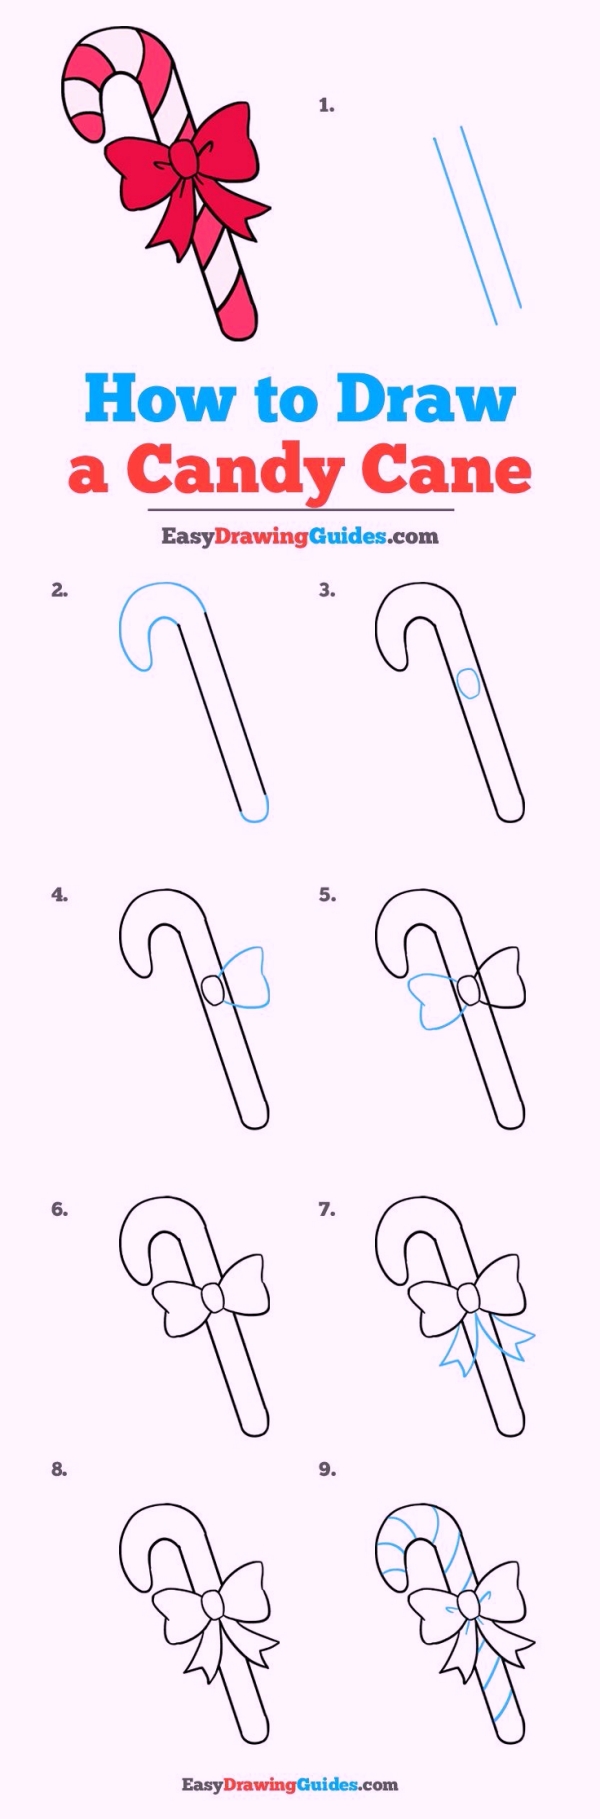 Cool and Simple Drawings Ideas To Kill Time/How to Draw a Candy Cane